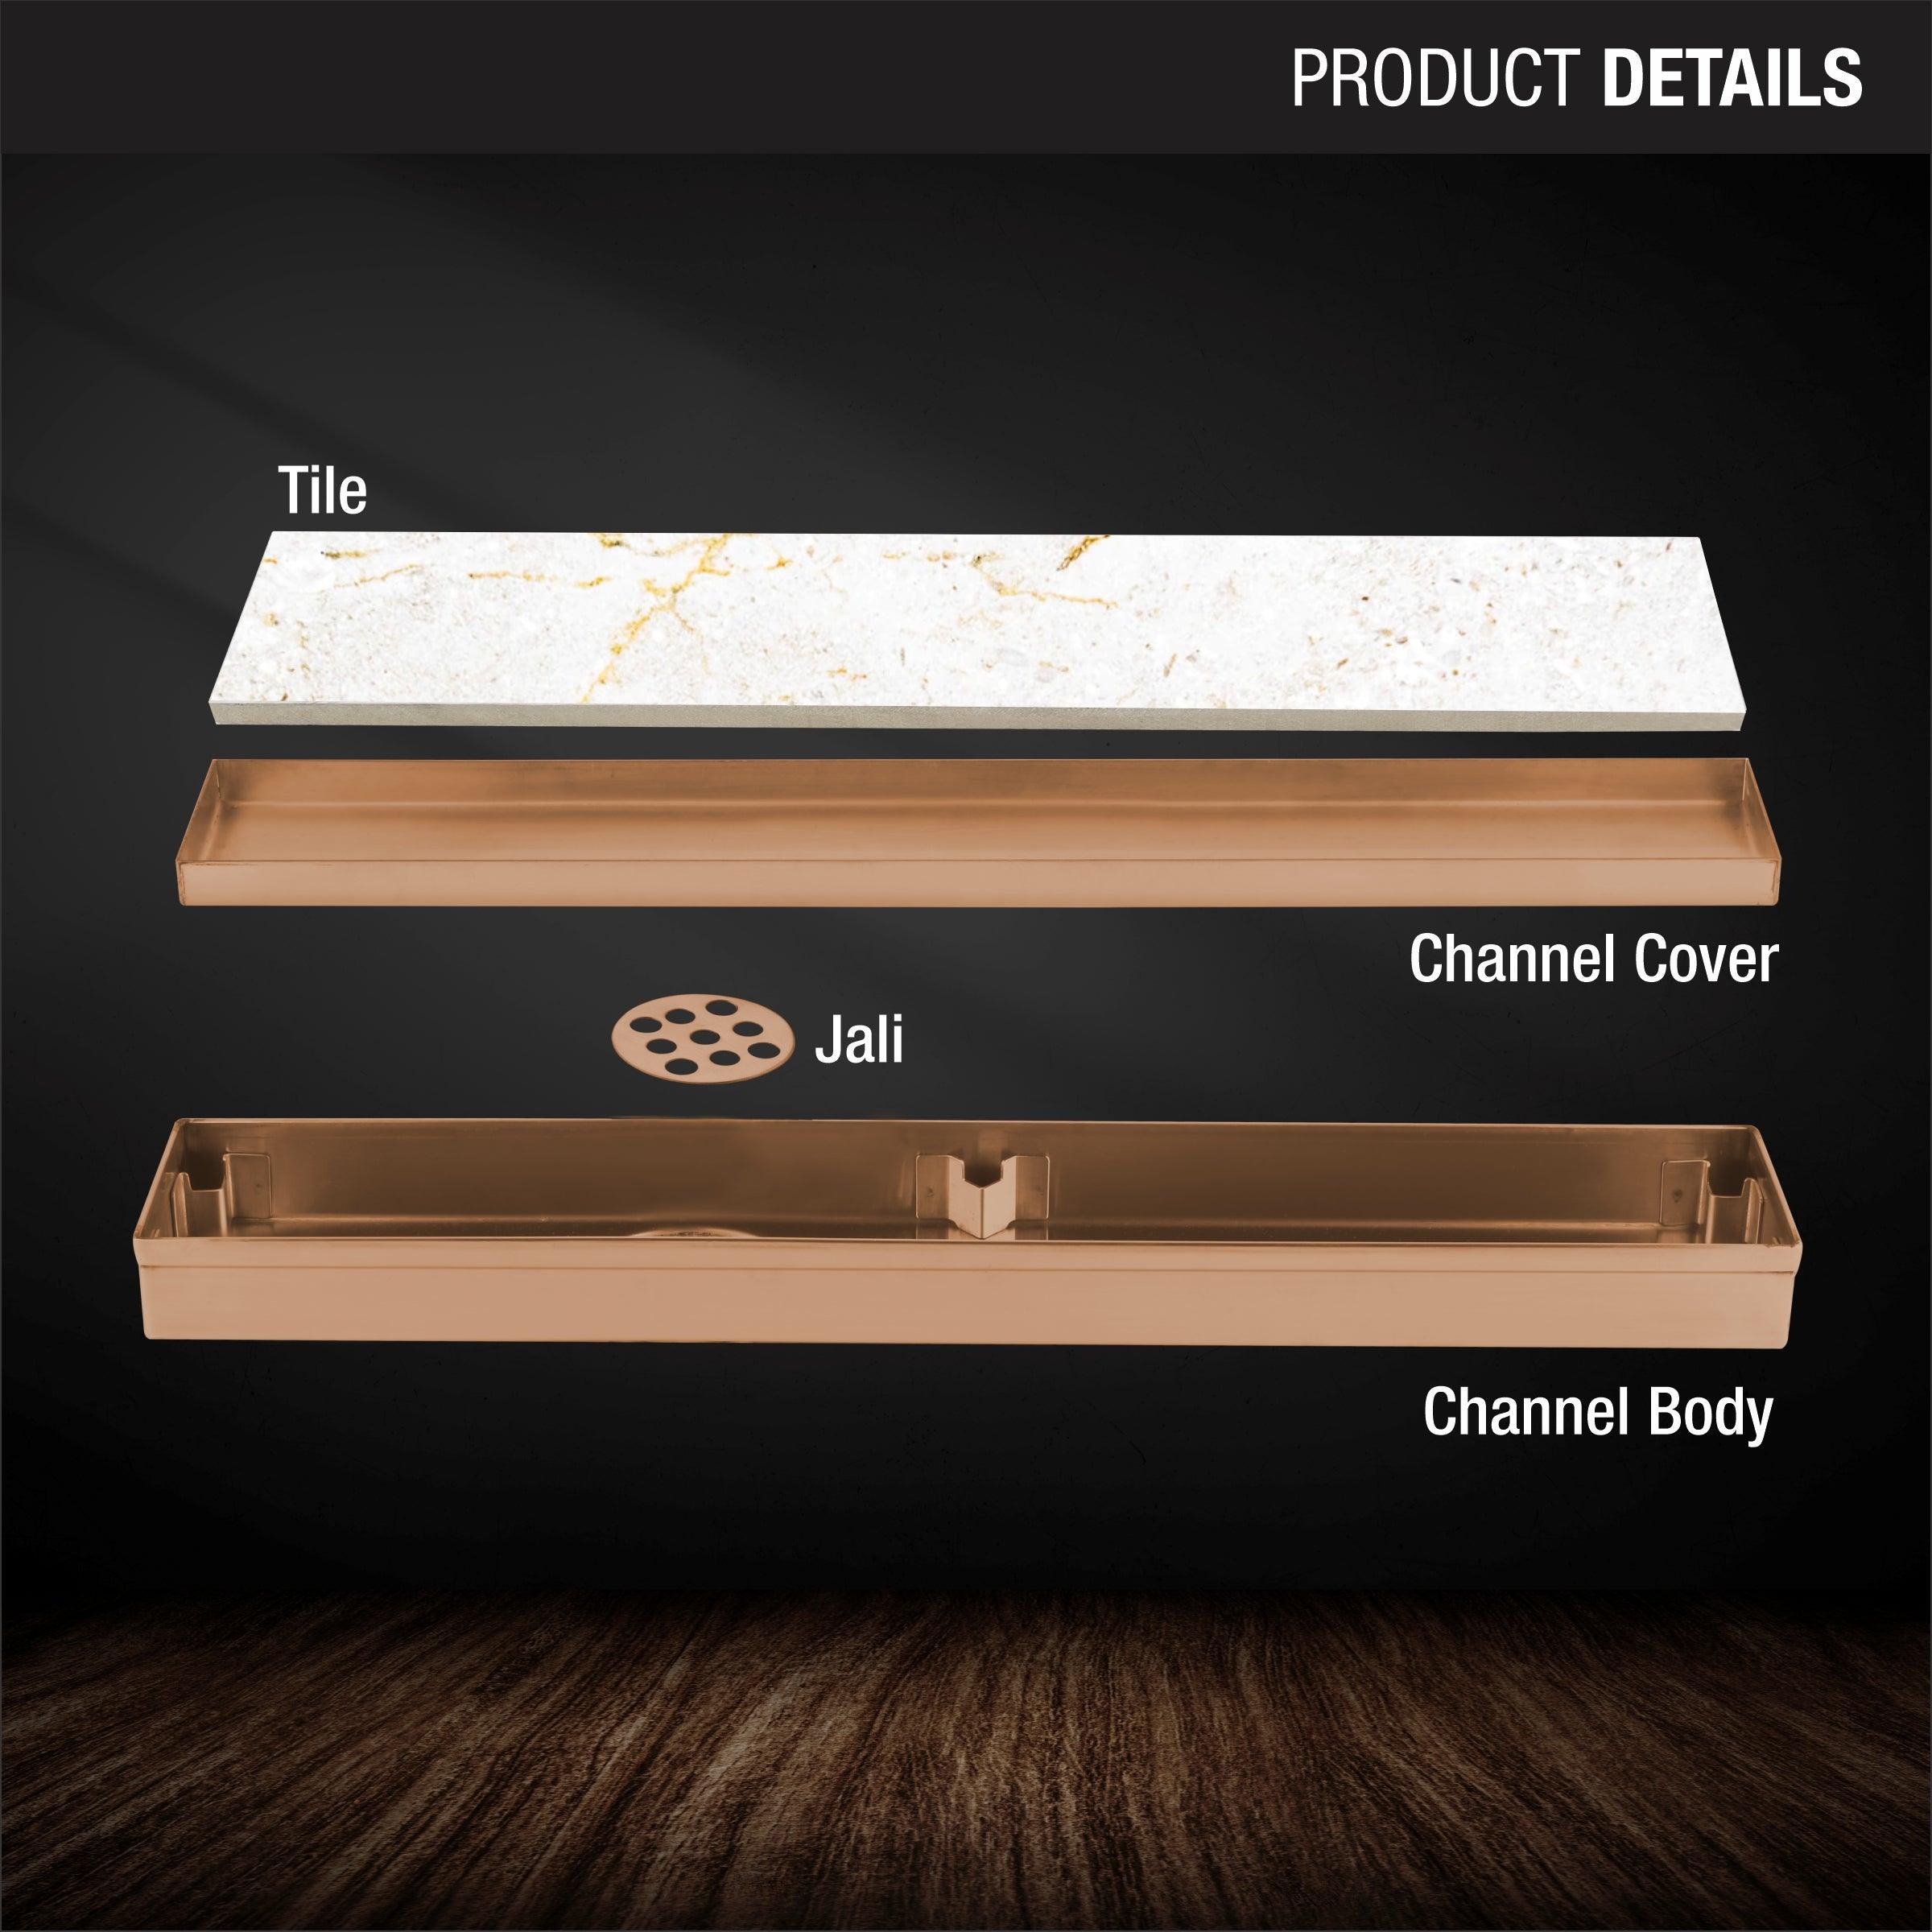 Tile Insert Shower Drain Channel - Yellow Gold (24 x 2 Inches) product details